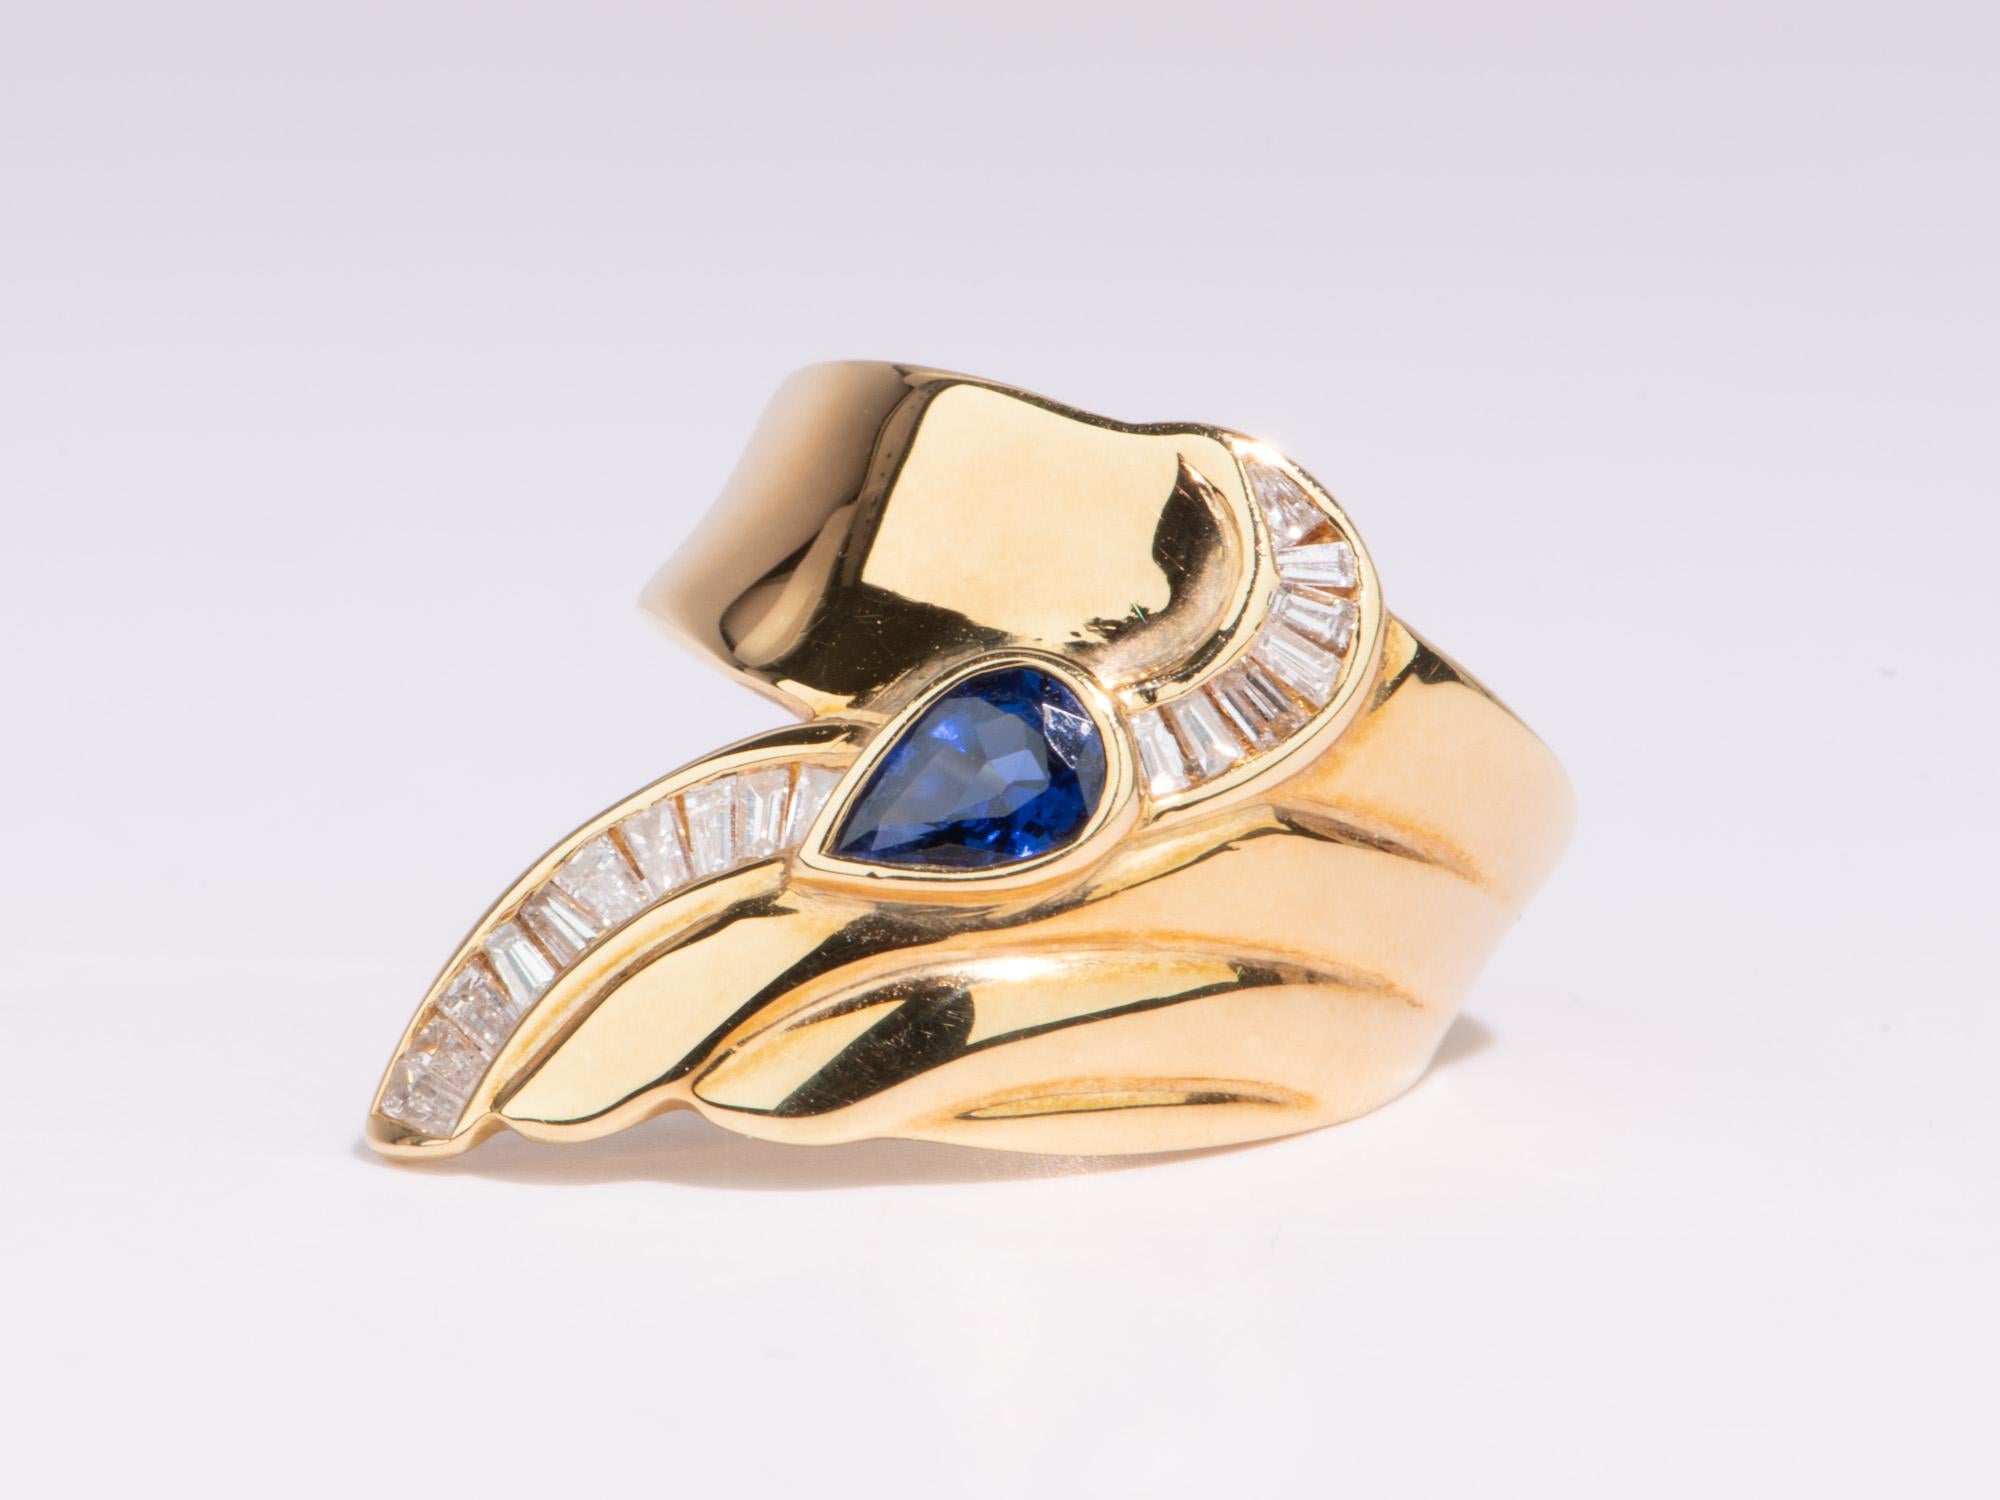 Wing Tip Ring with Blue Sapphire 18K Gold 10.7g V1123 In New Condition For Sale In Osprey, FL